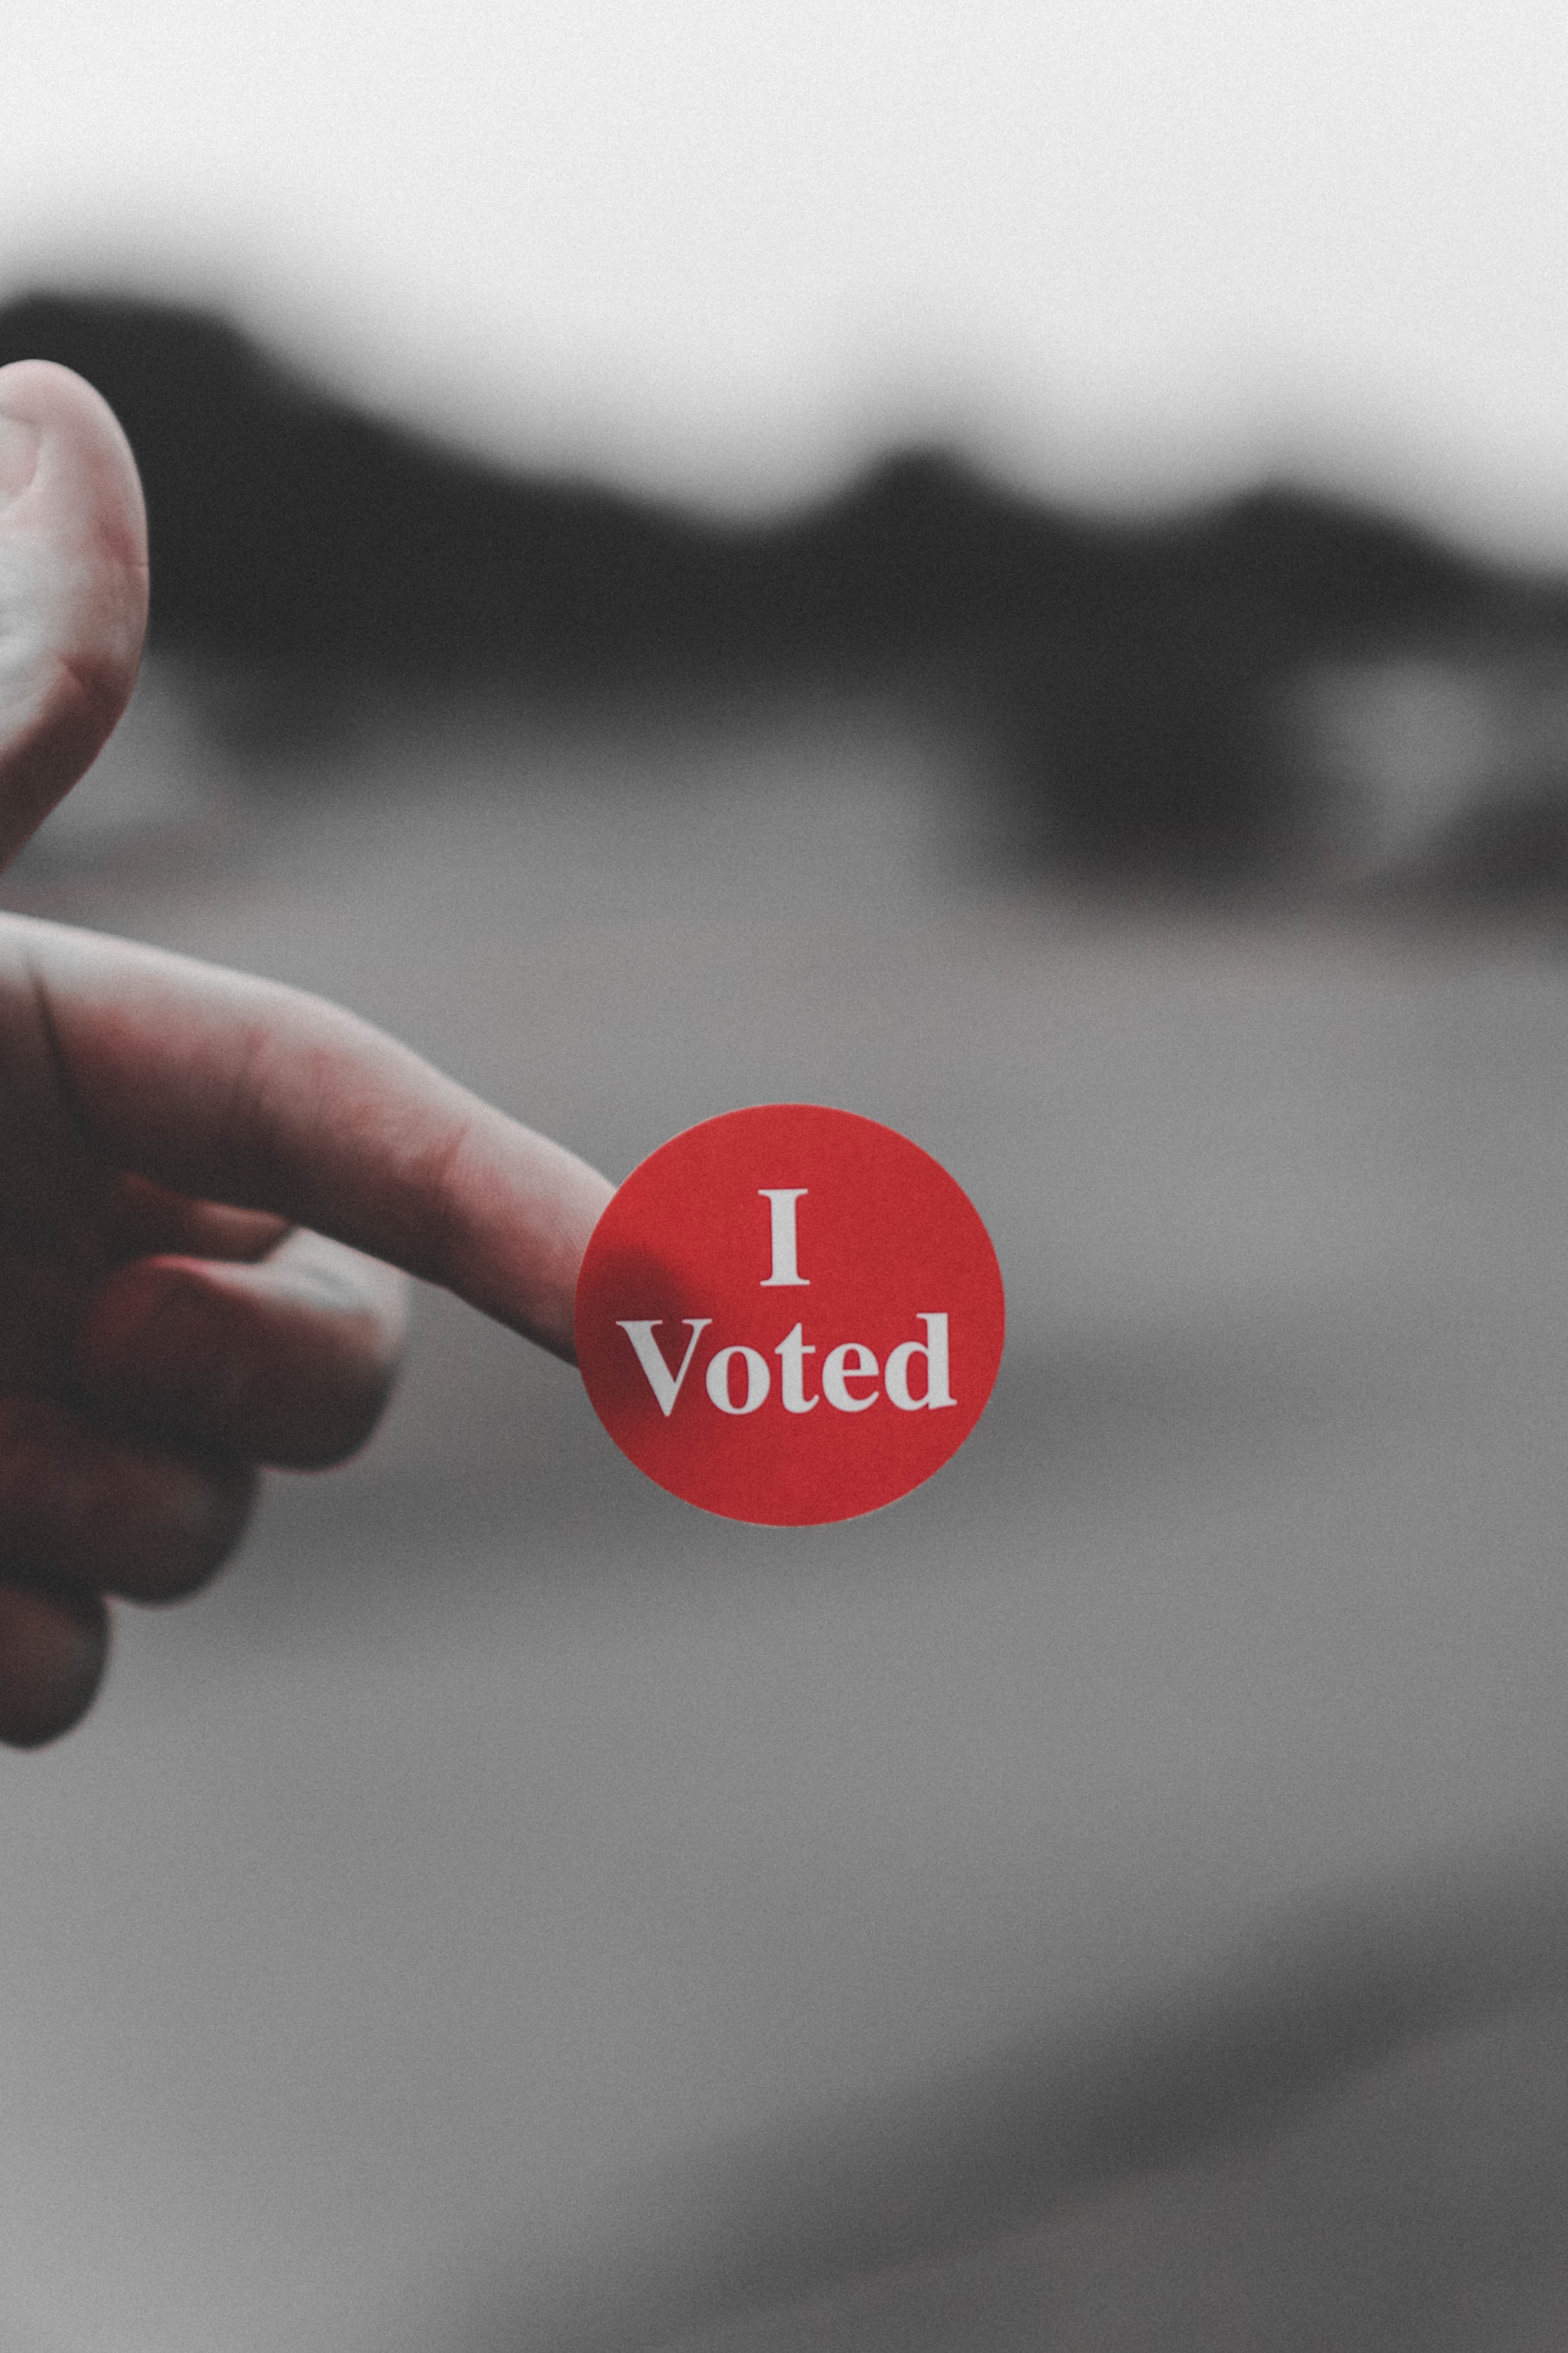 Person holding red "I Voted" sticker